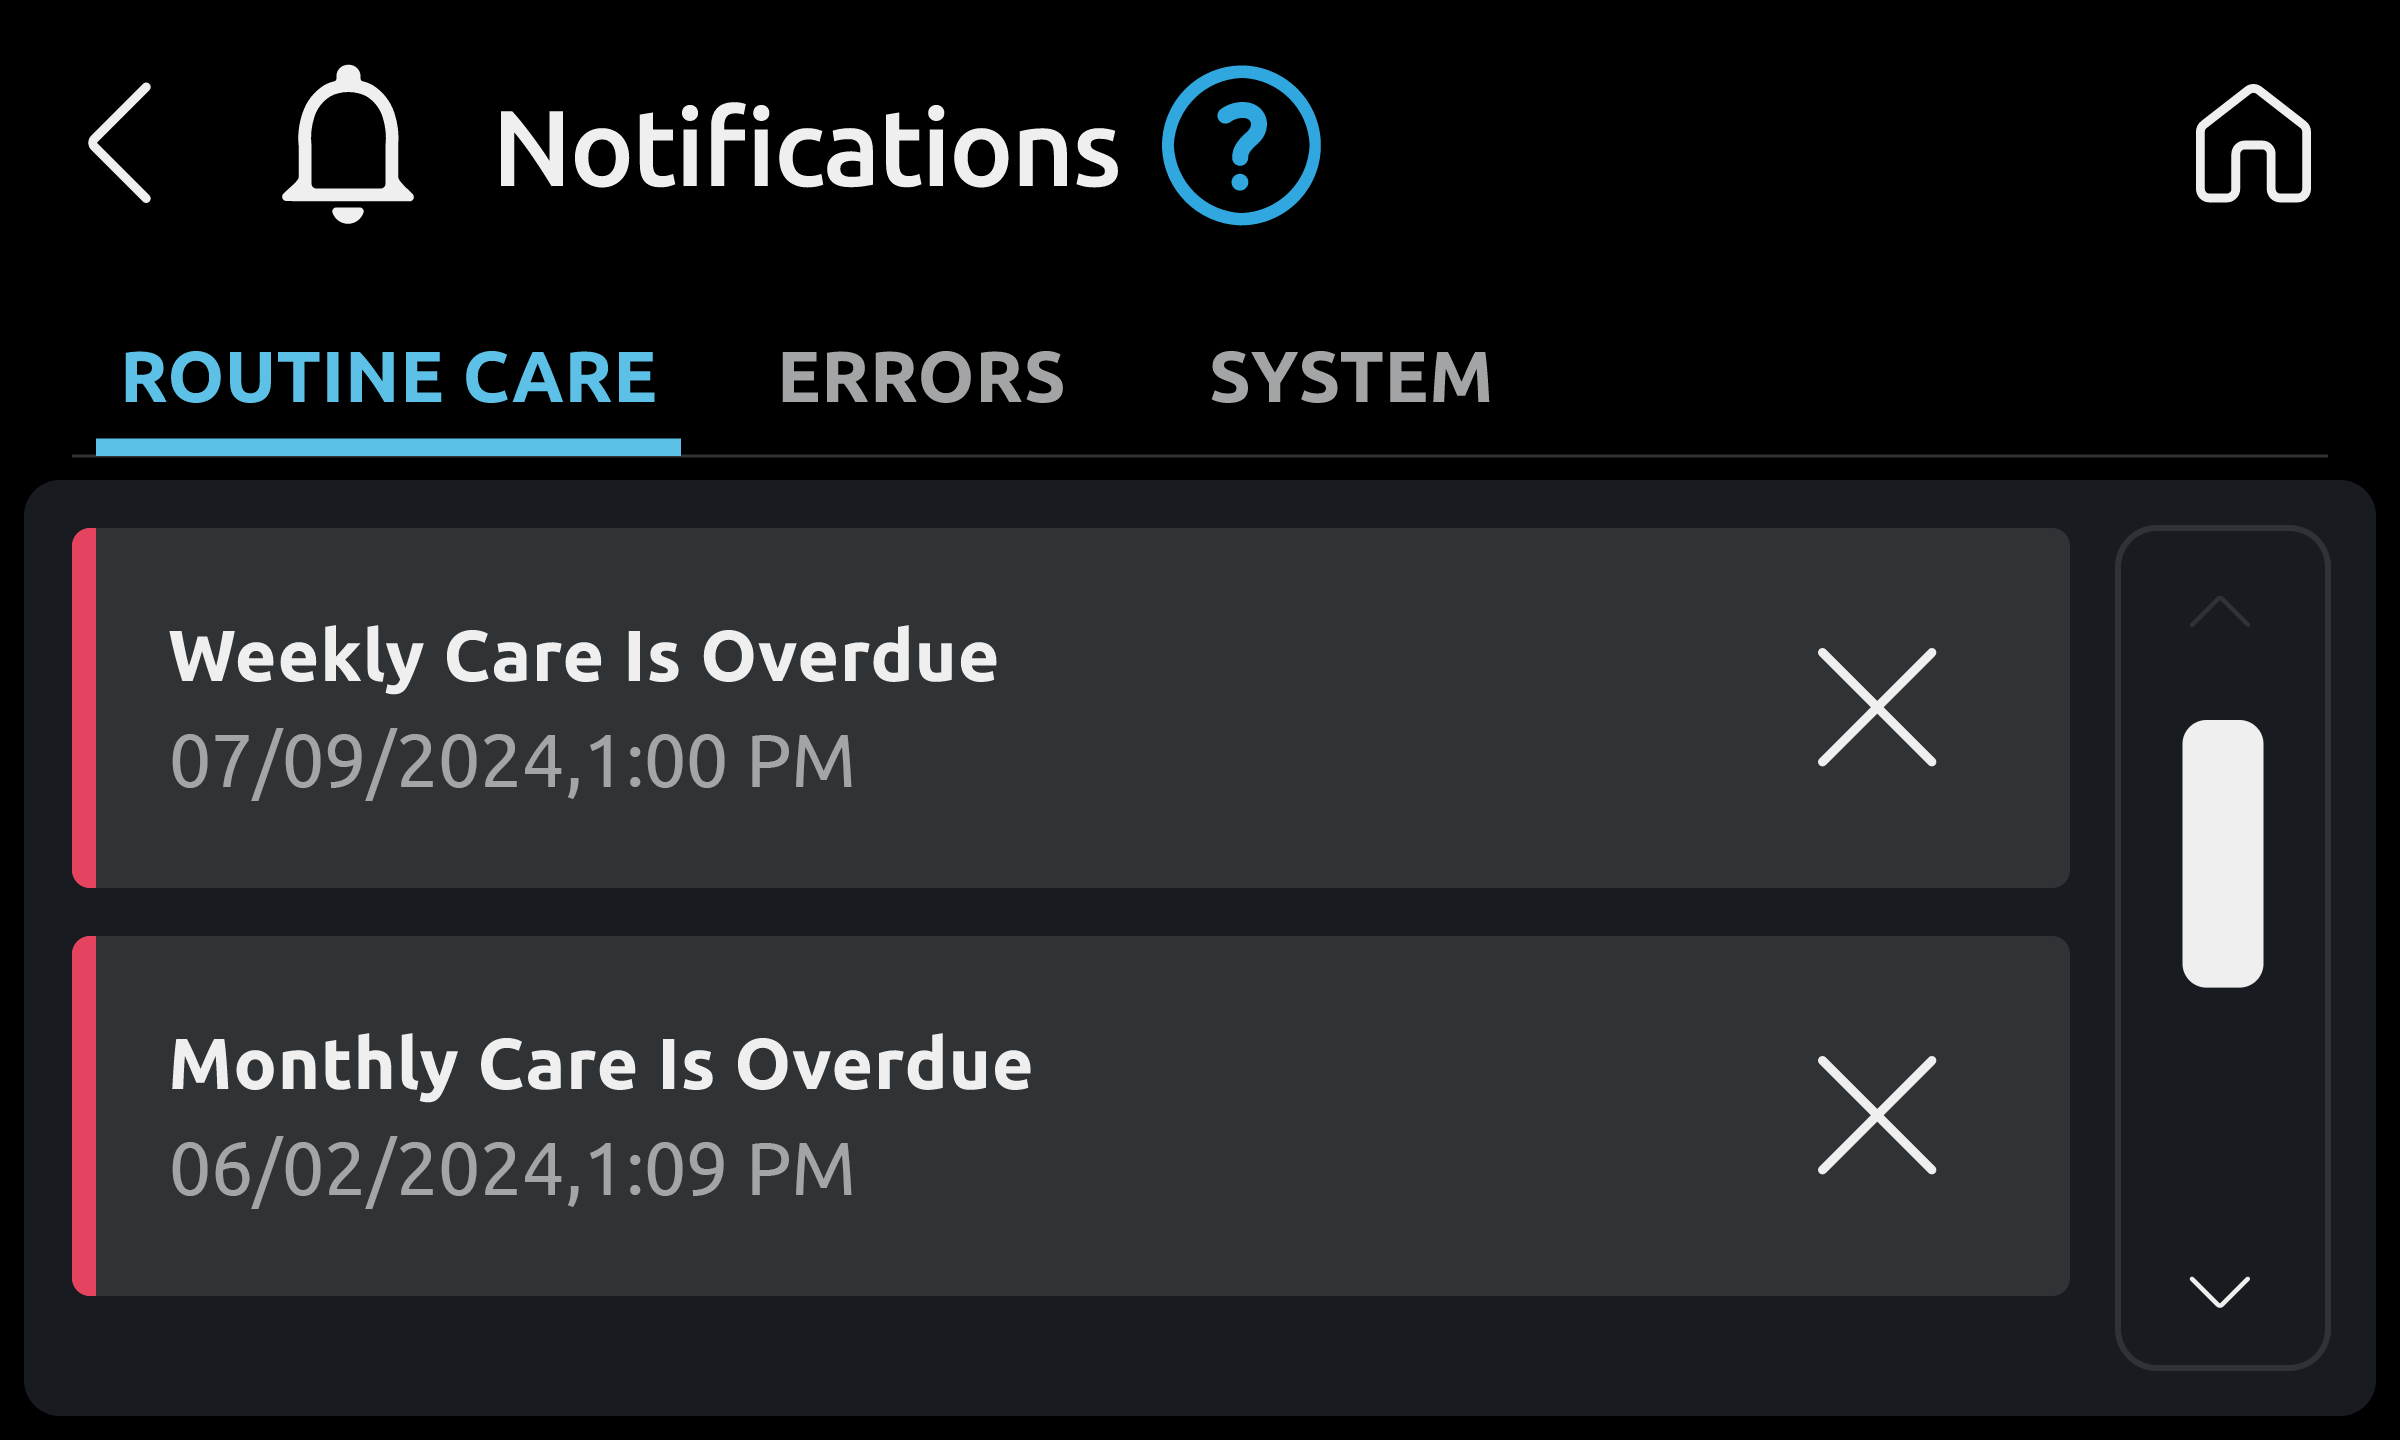 Routine Care Notifications